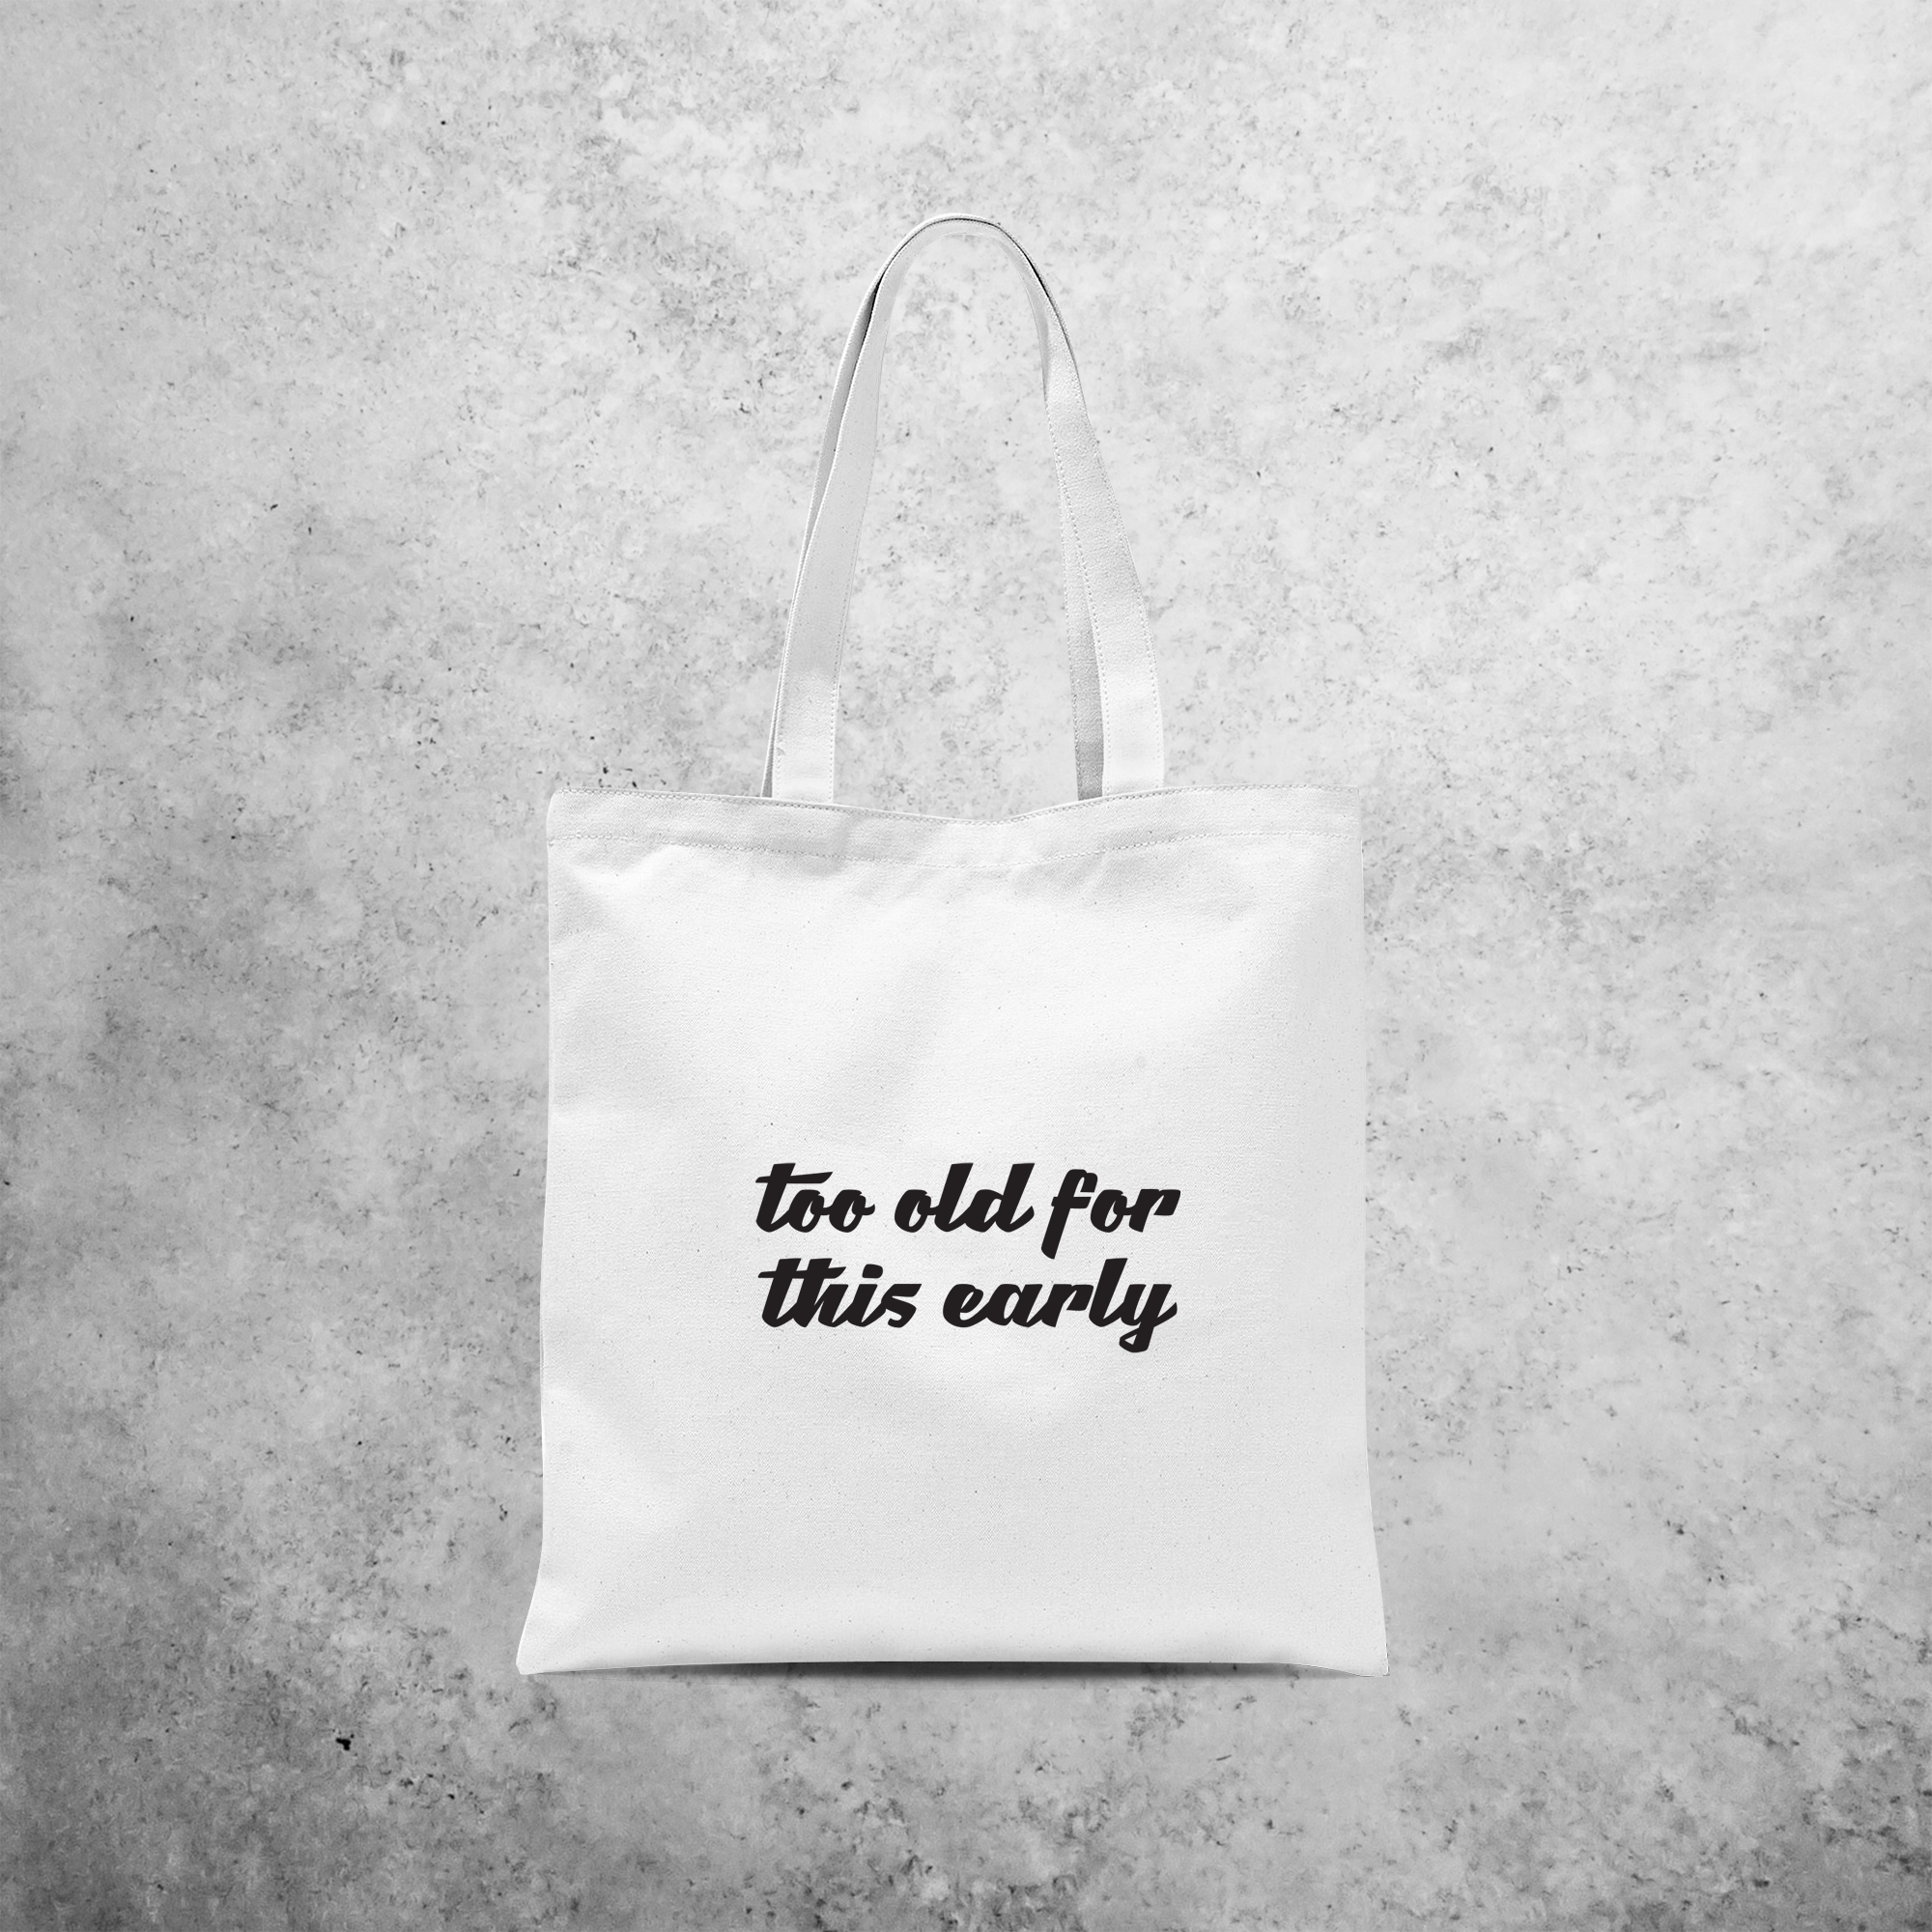 'Too old for this early' tote bag